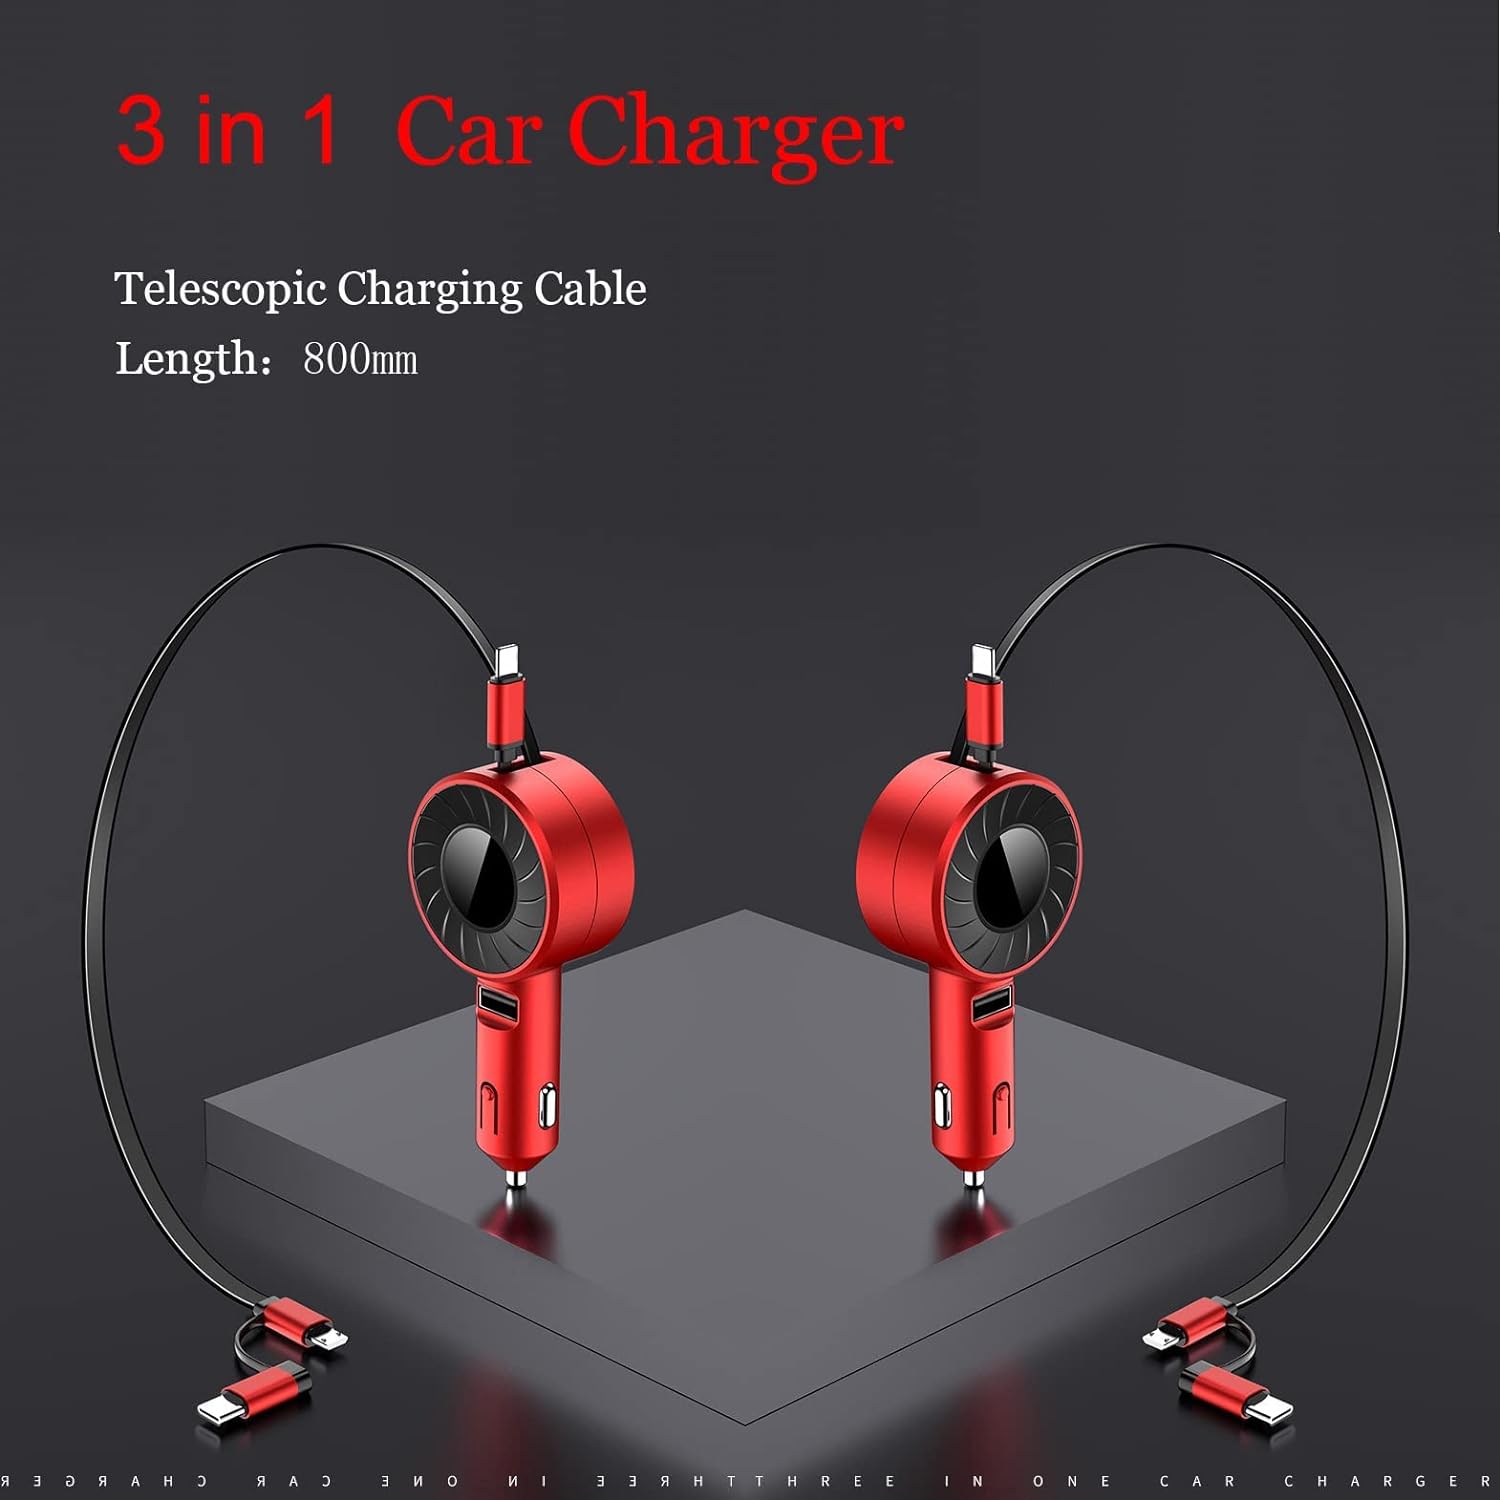 3-in-1 Retractable Cable Multi-Charging Car Charger Adapter placed on the floor